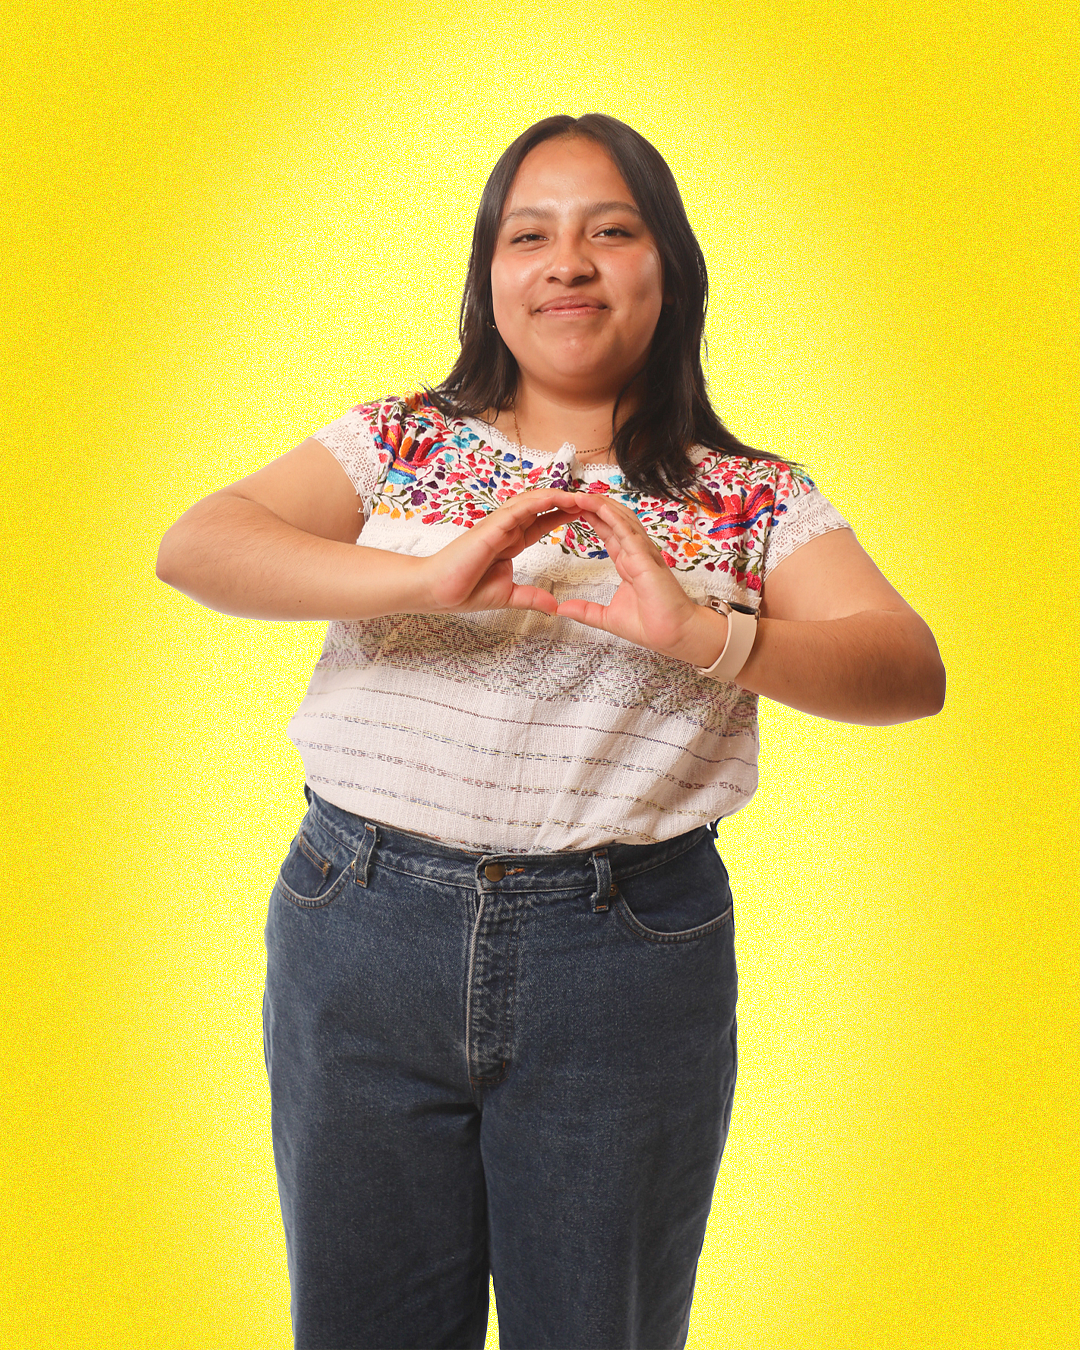 student loany carreon jimenez throwing up her "O" hand symbol